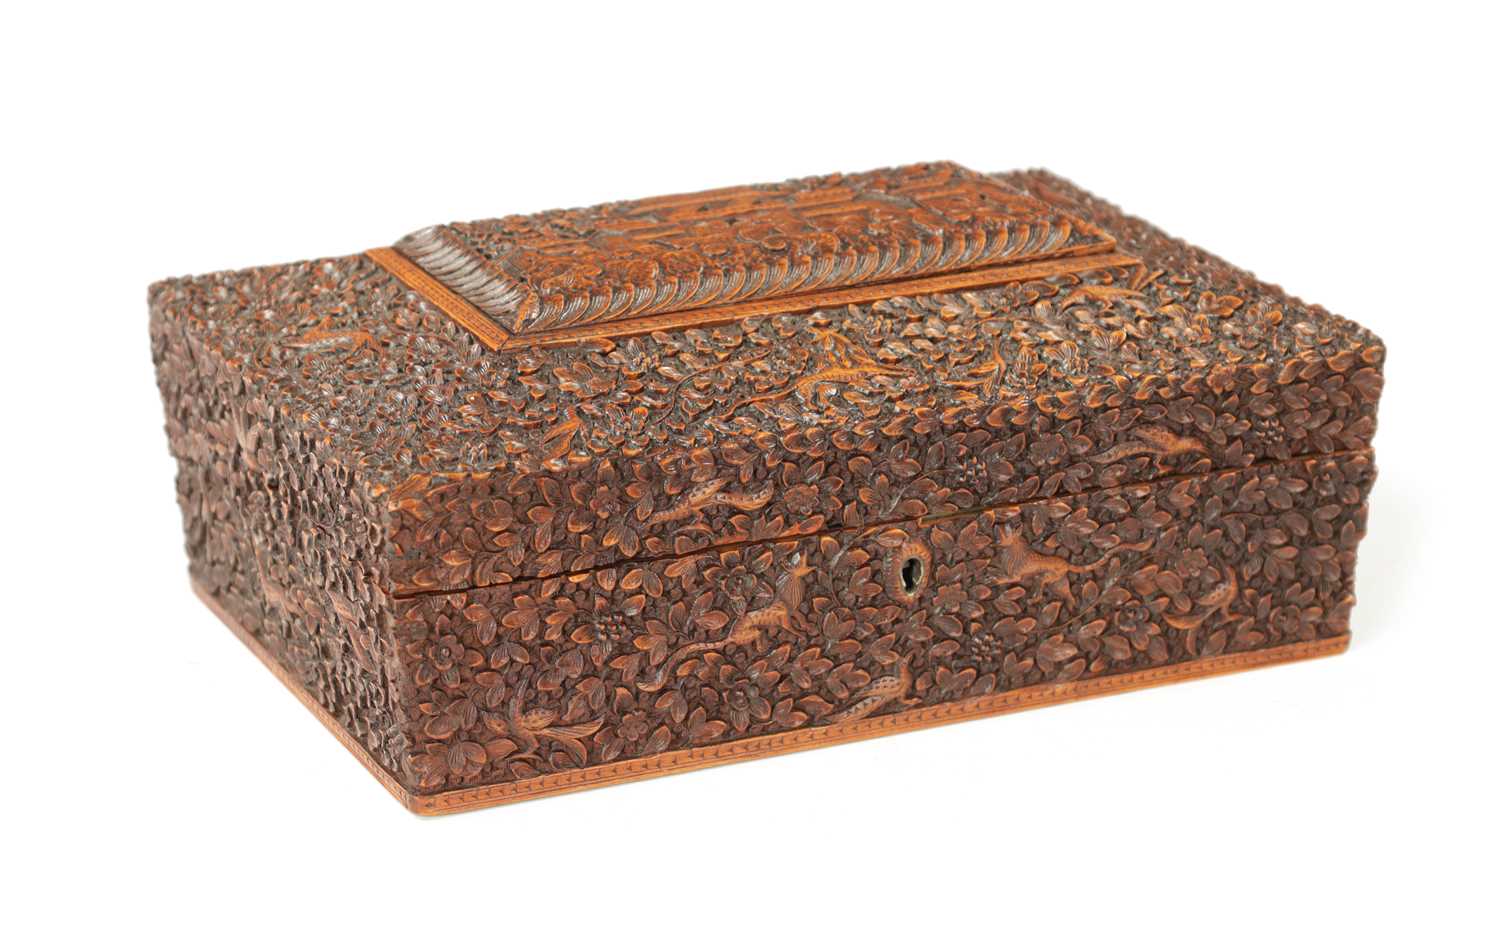 A 19TH CENTURY INDIAN CARVED HARDWOOD SEWING BOX